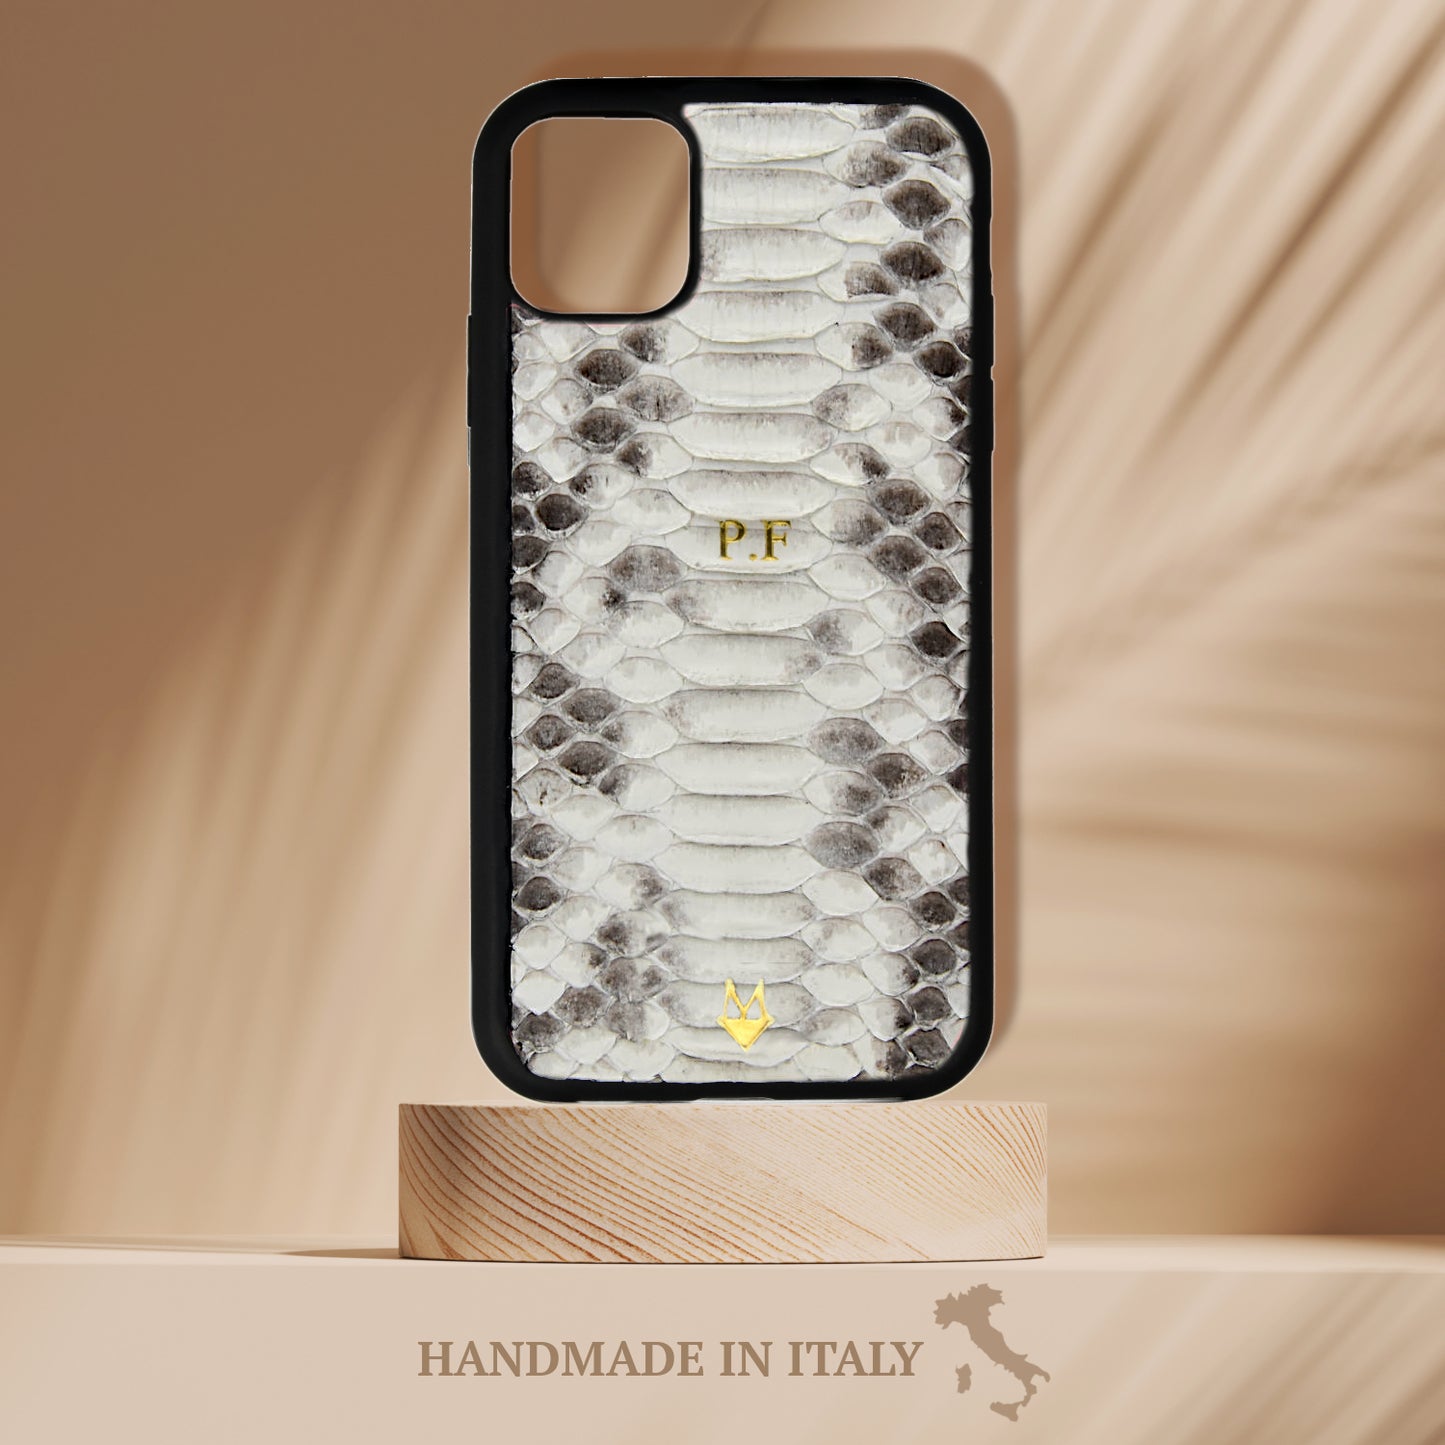 Phone case for Iphone 14/ 13/12/ 11/ XR models in White genuine Python skin